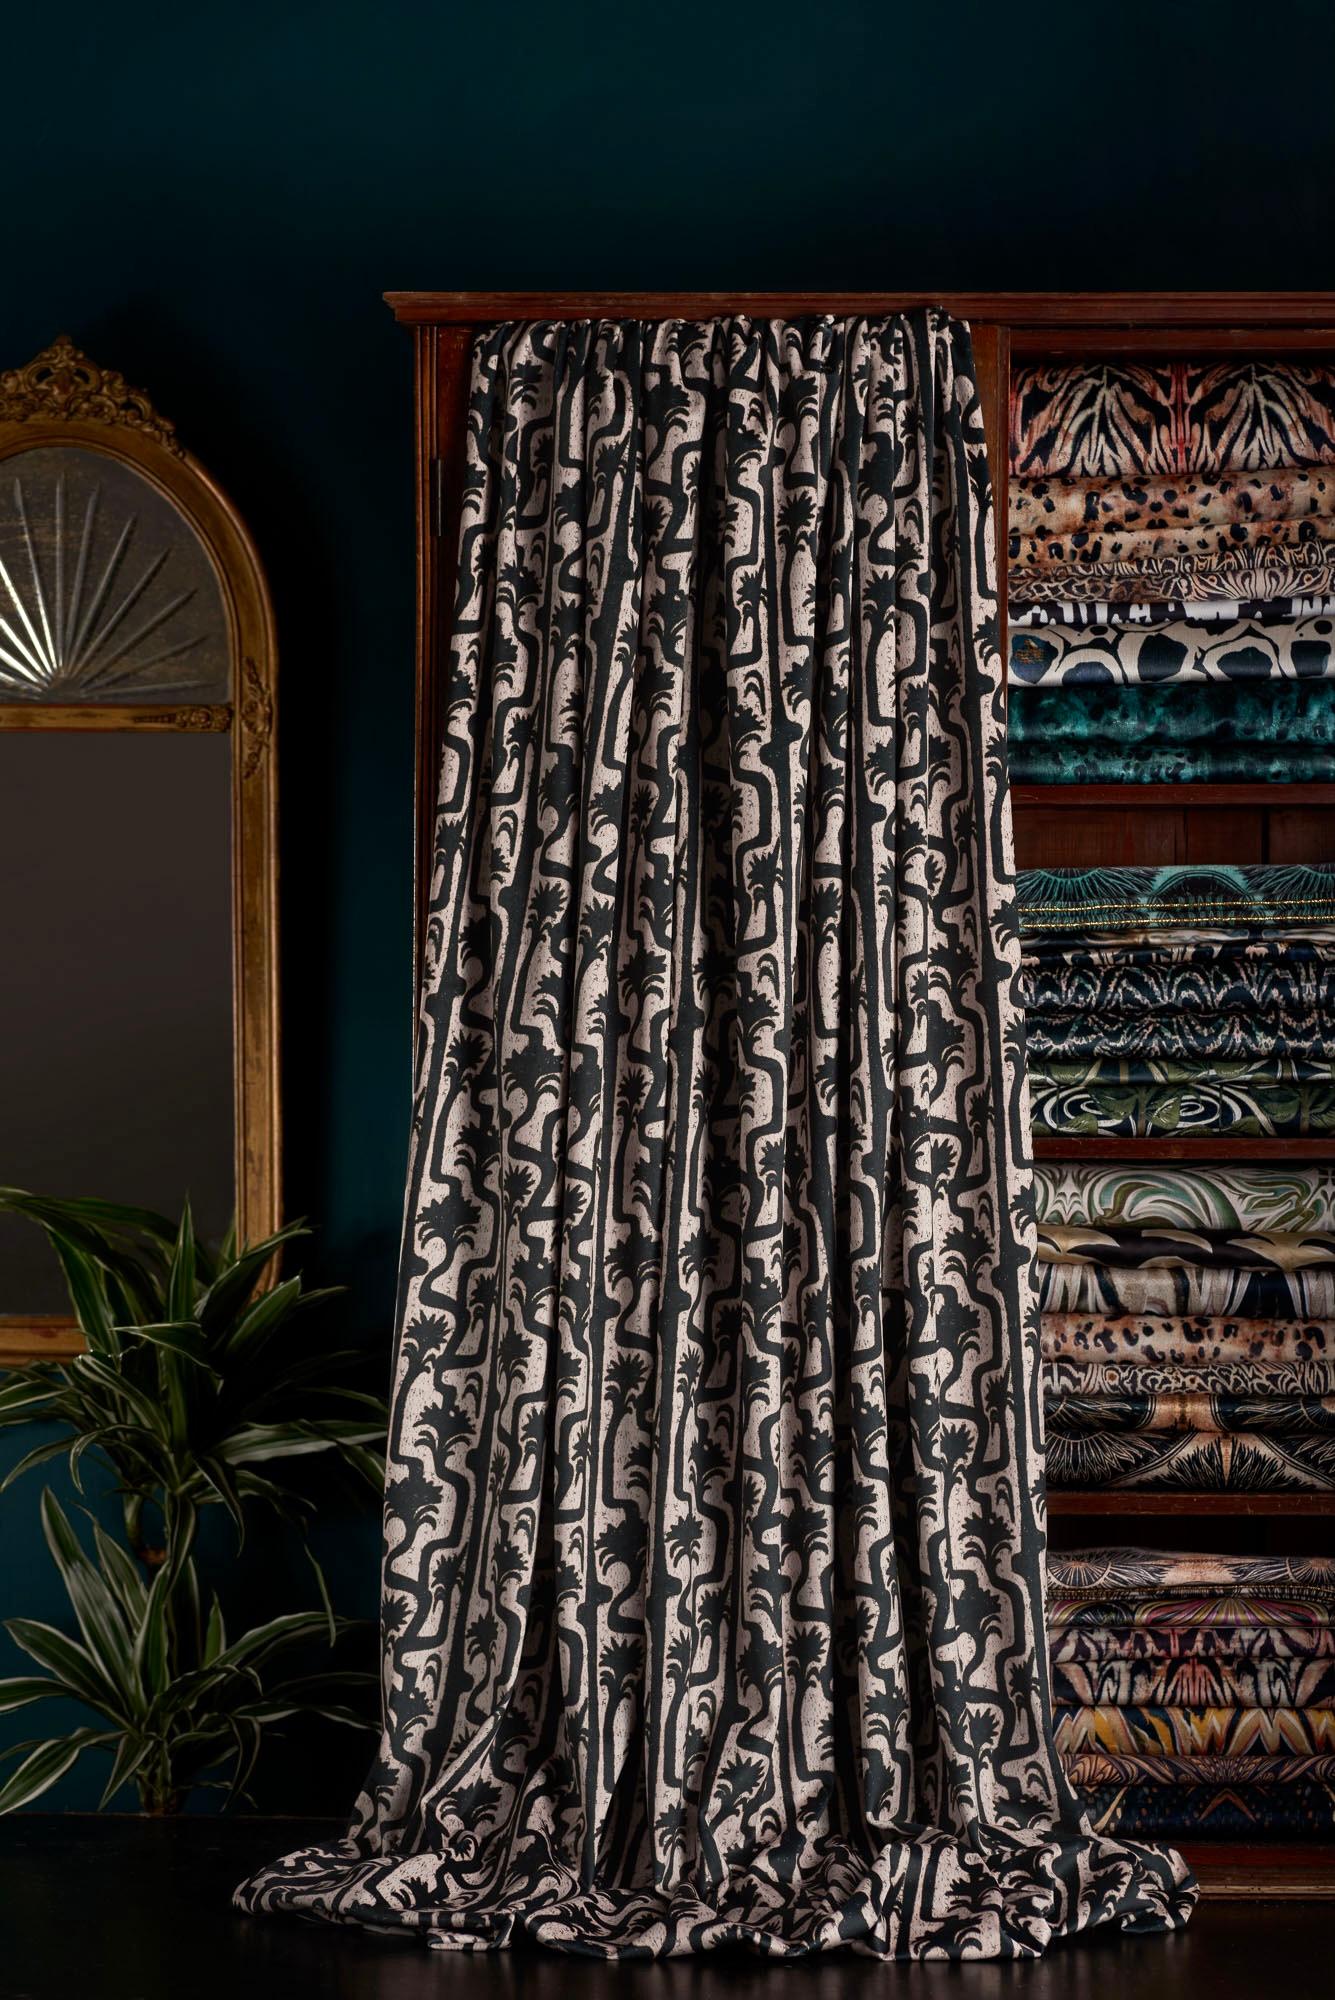 This blush pink and soft black velvet works with its undulating growing palm tree design has a relaxed and sculptural quality, softened at the edges. This works well layered with plants and textured elements.

This velvet has a very different handle